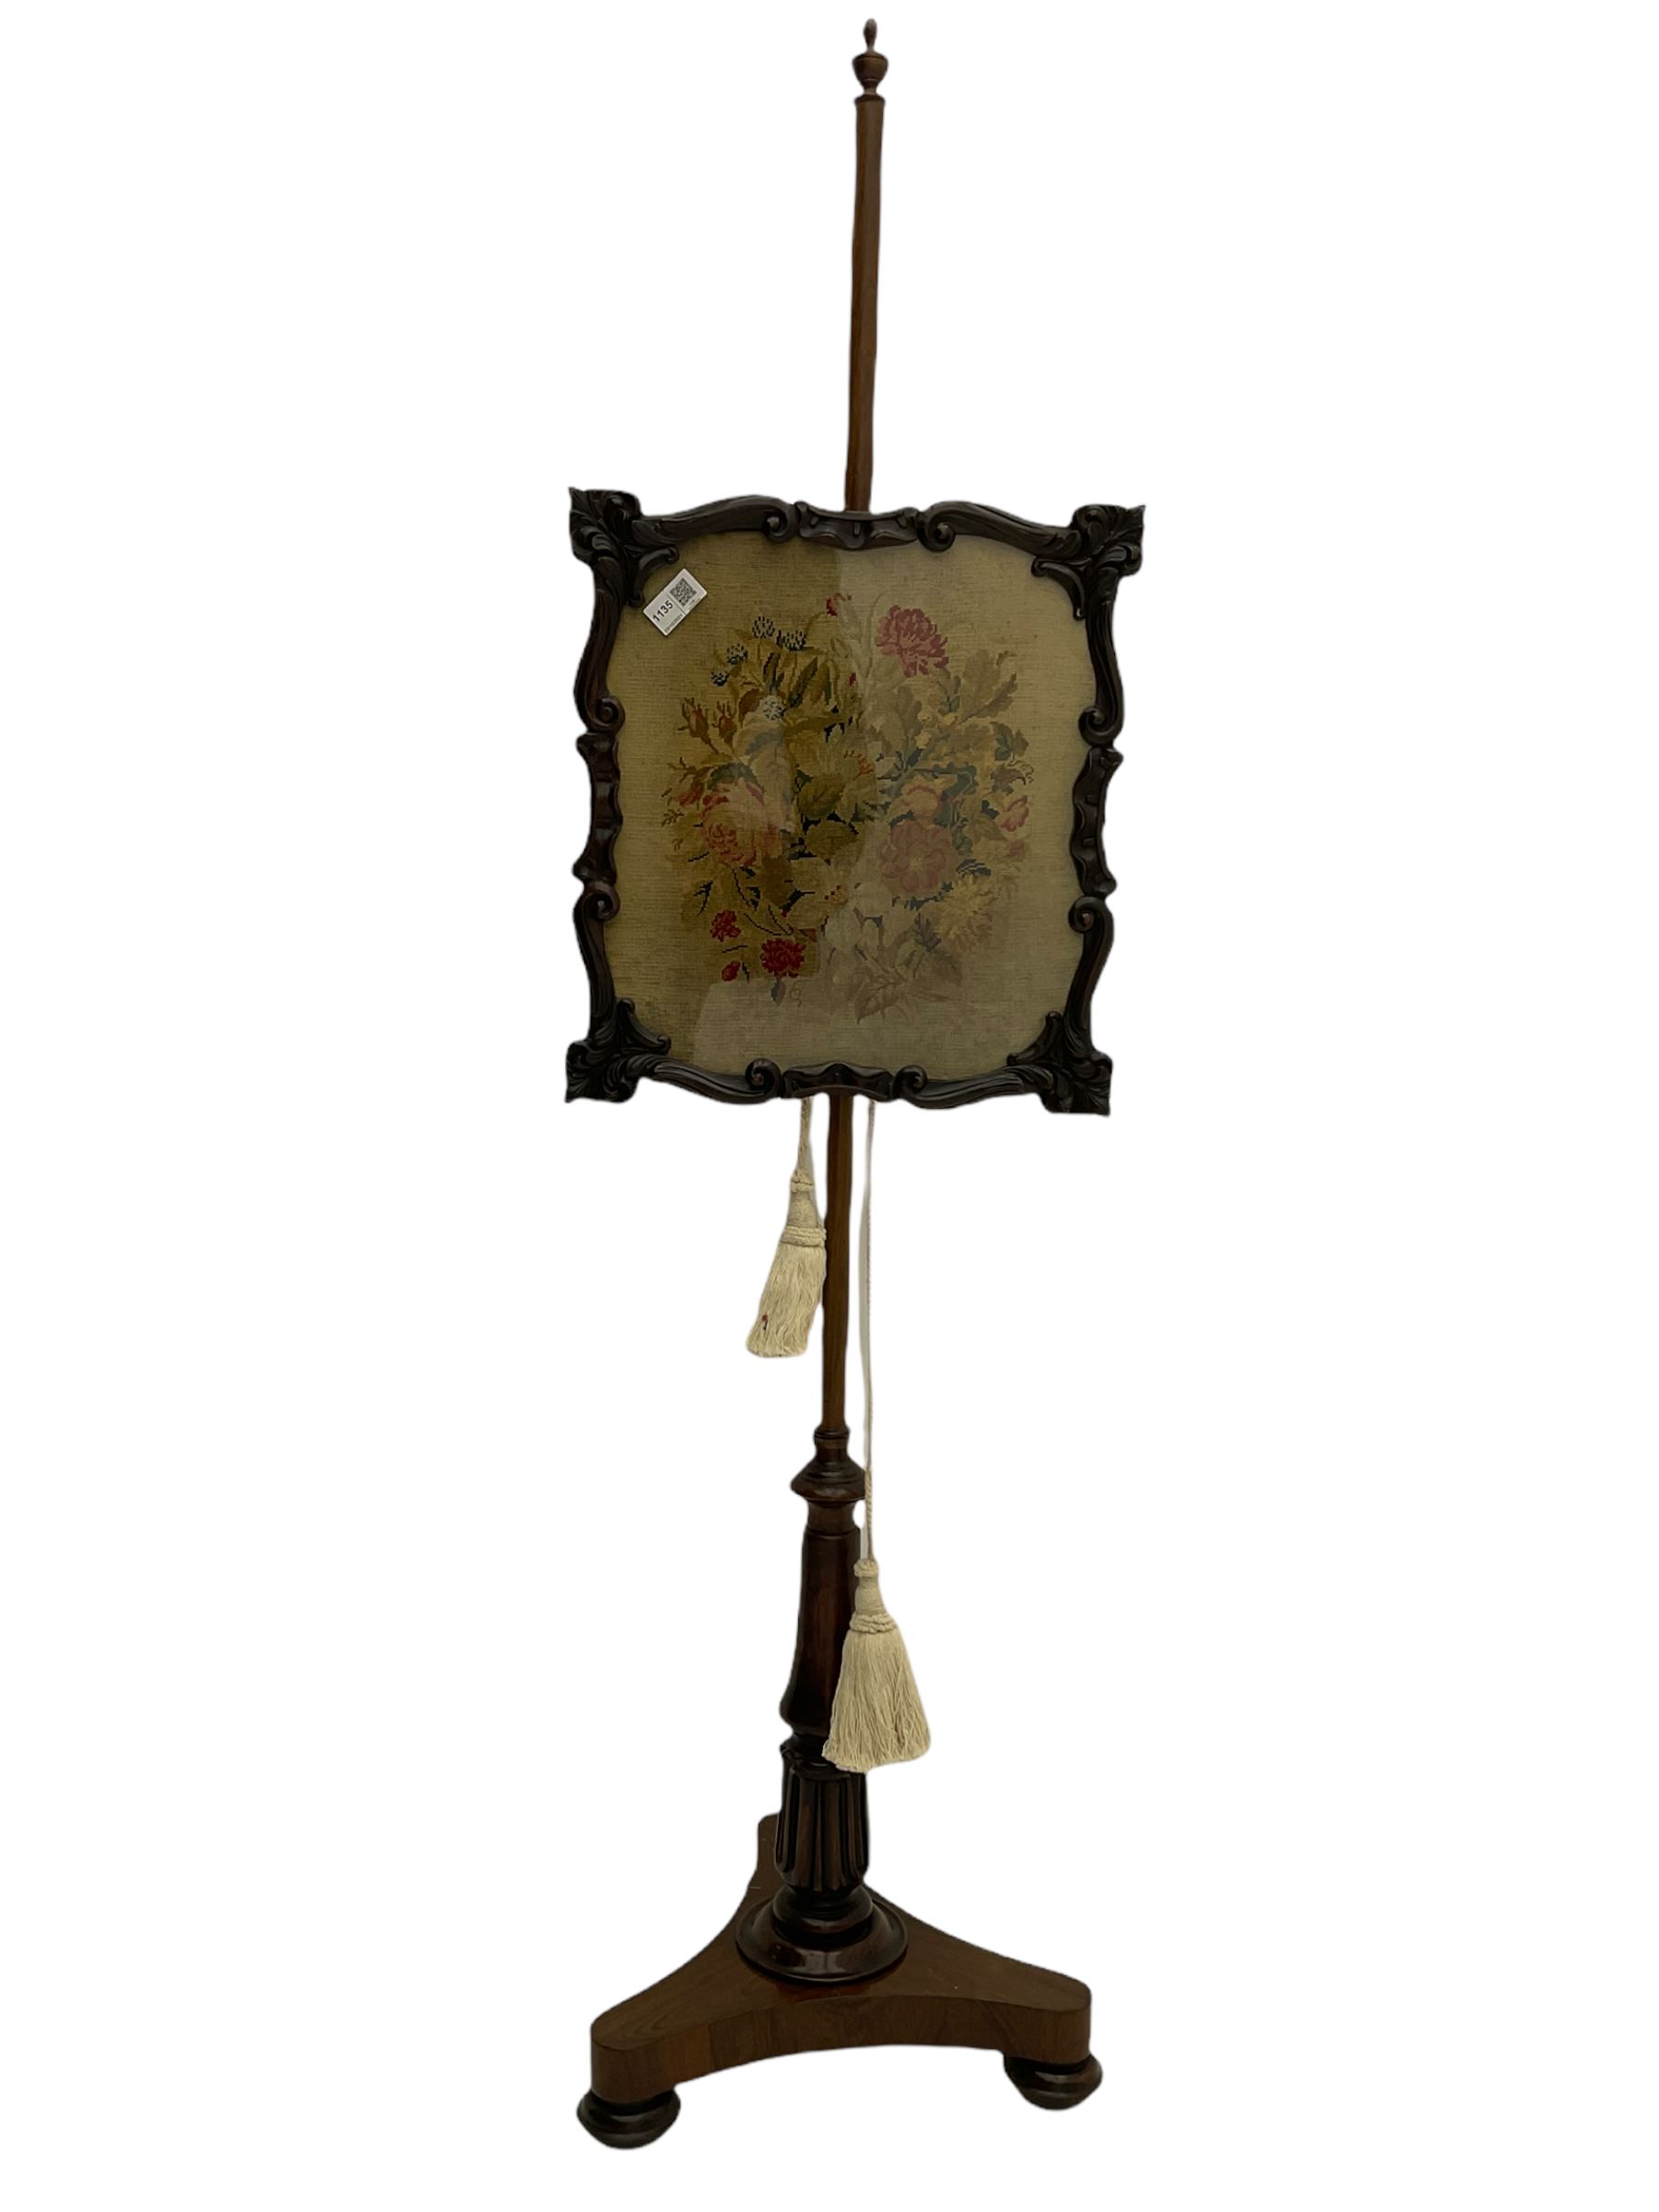 Early 19th century pole screen